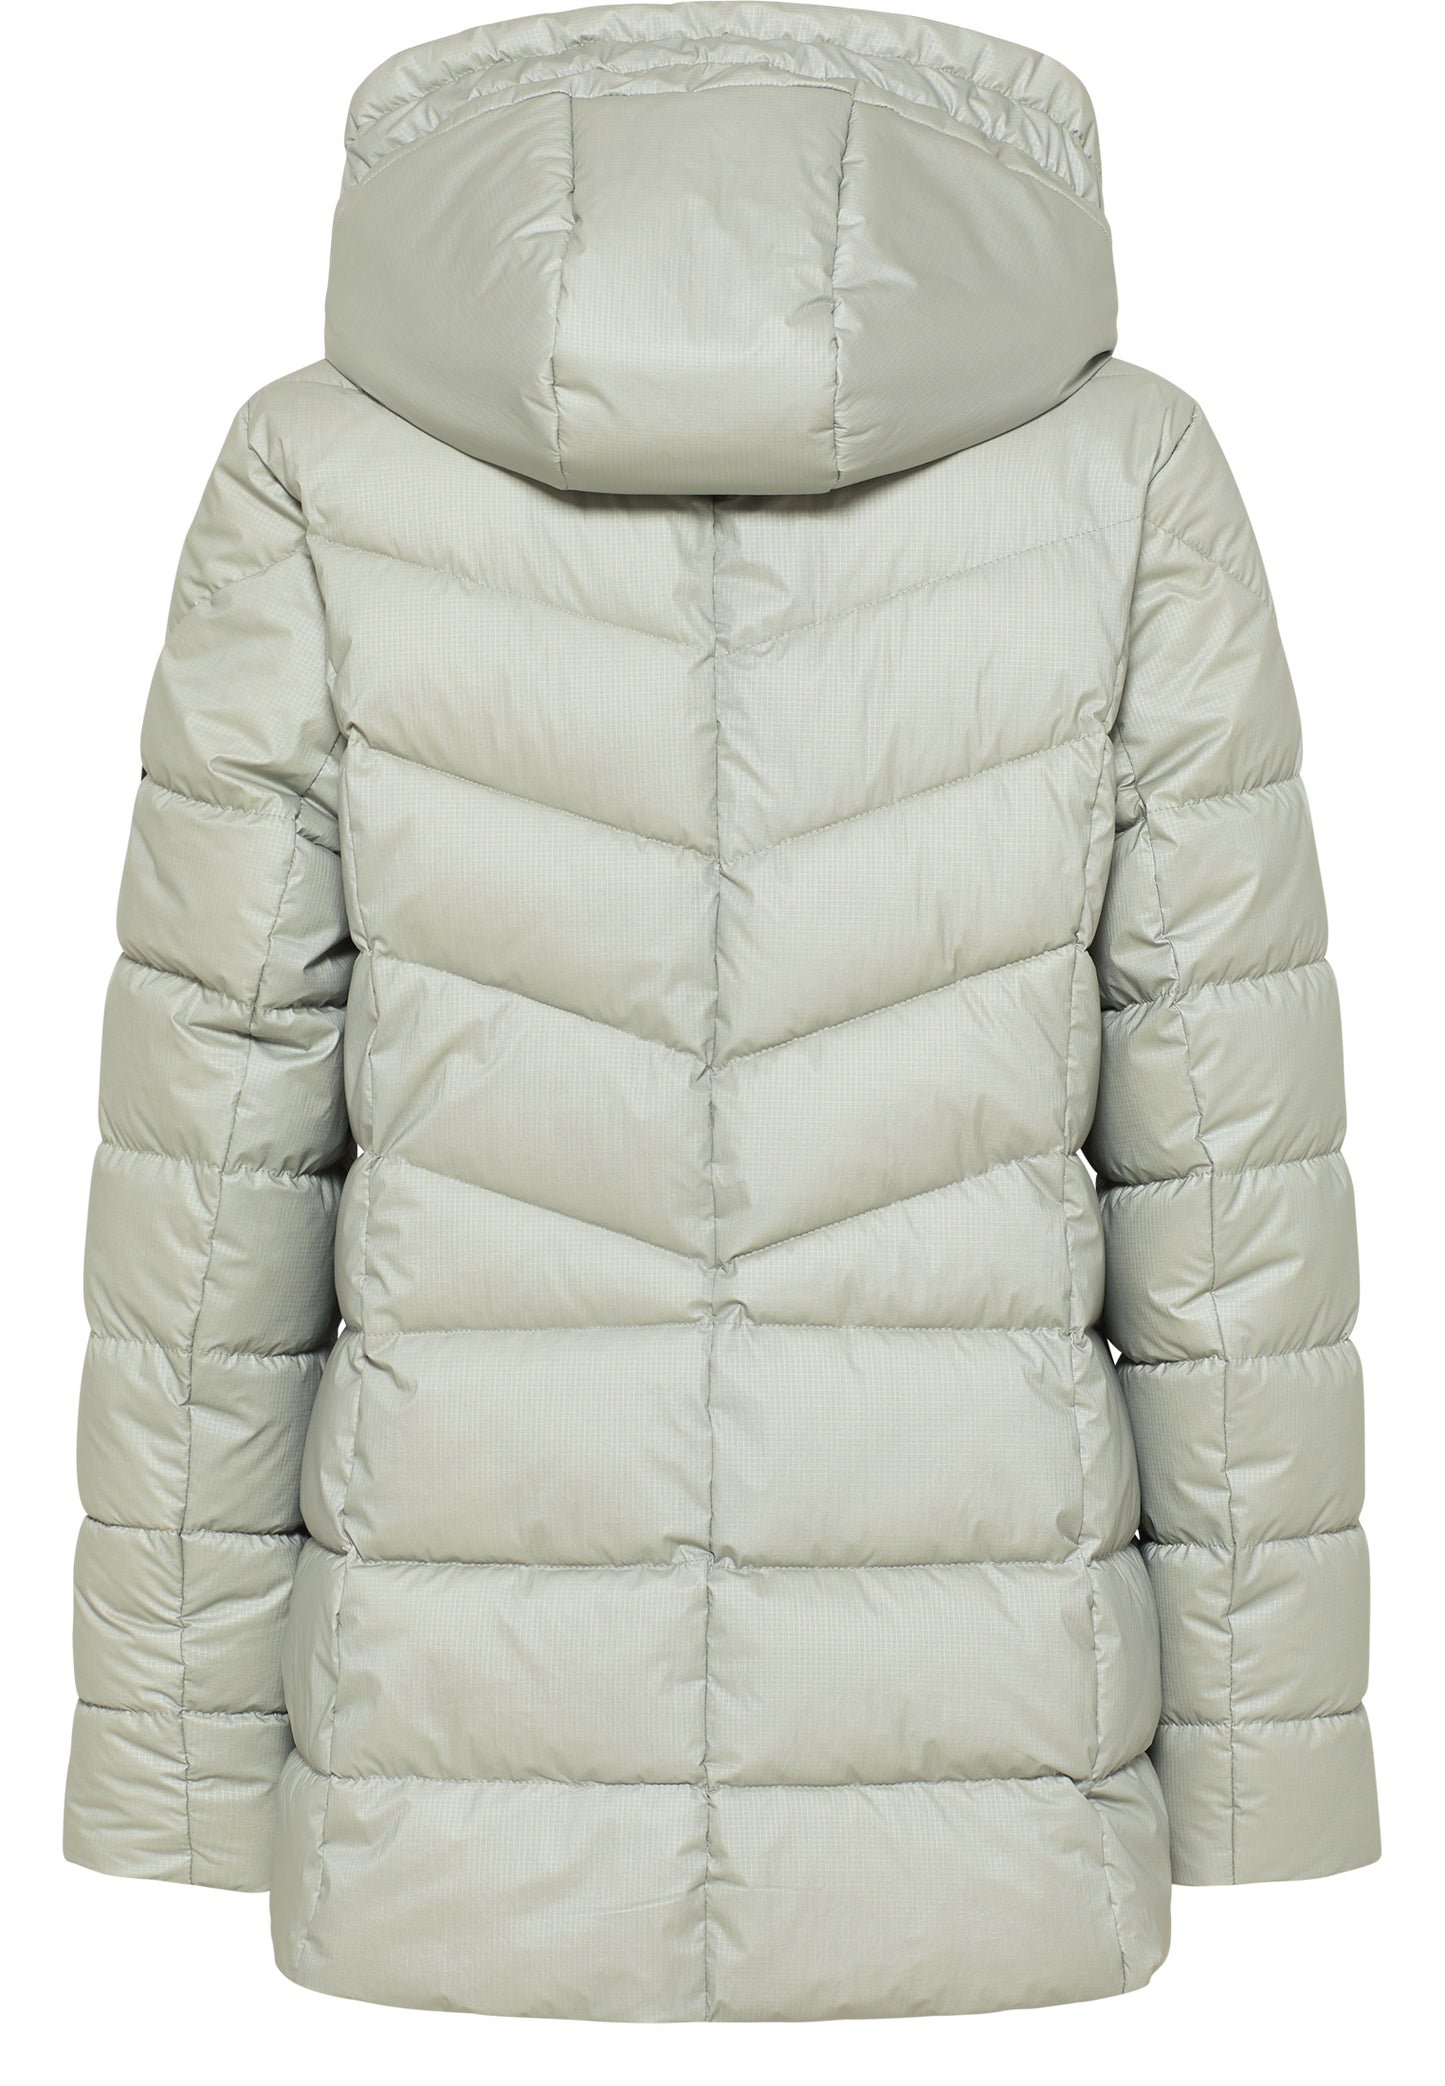 Down Free jacket with hood